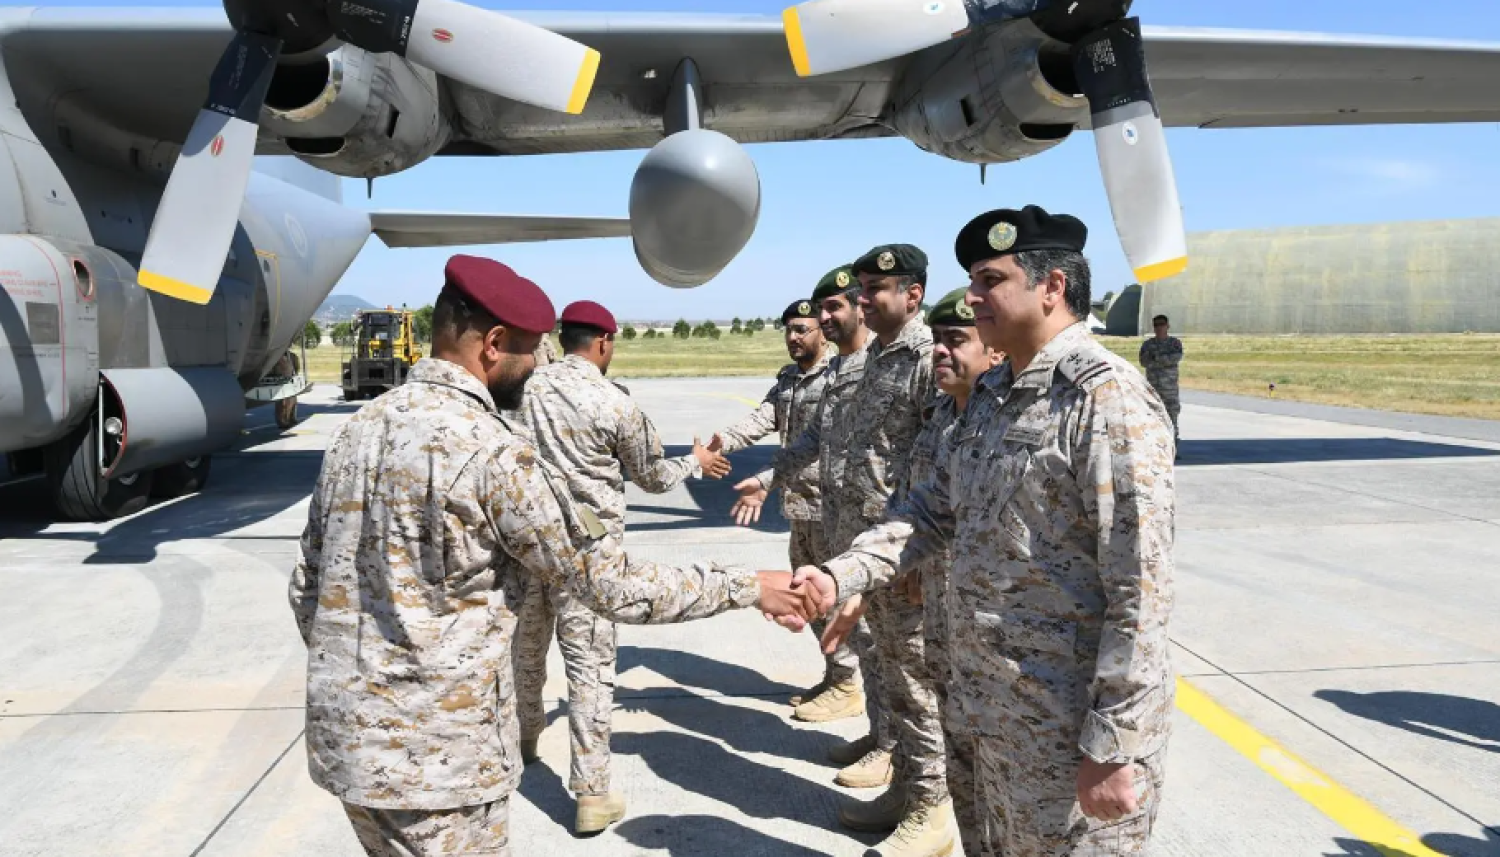 The Saudi military units participating in the exercise arrived in Türkiye and were received by high-ranking army officers - SPA